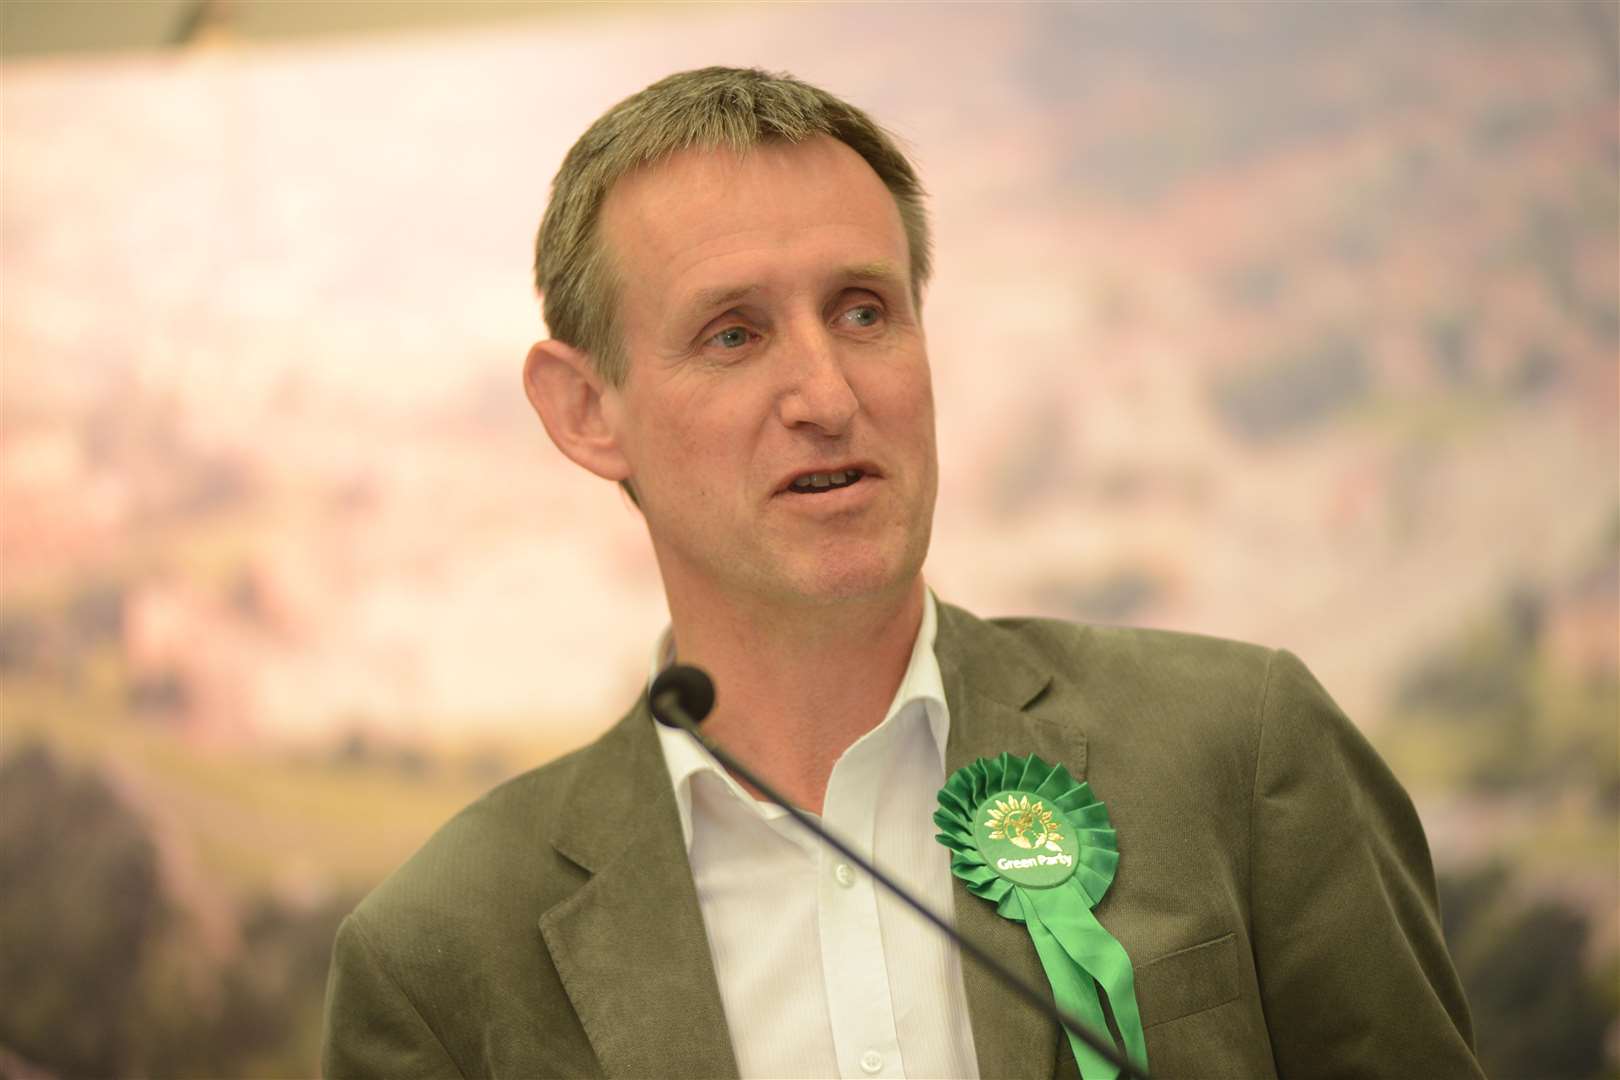 Martin Whybrow, the only Green county councillor